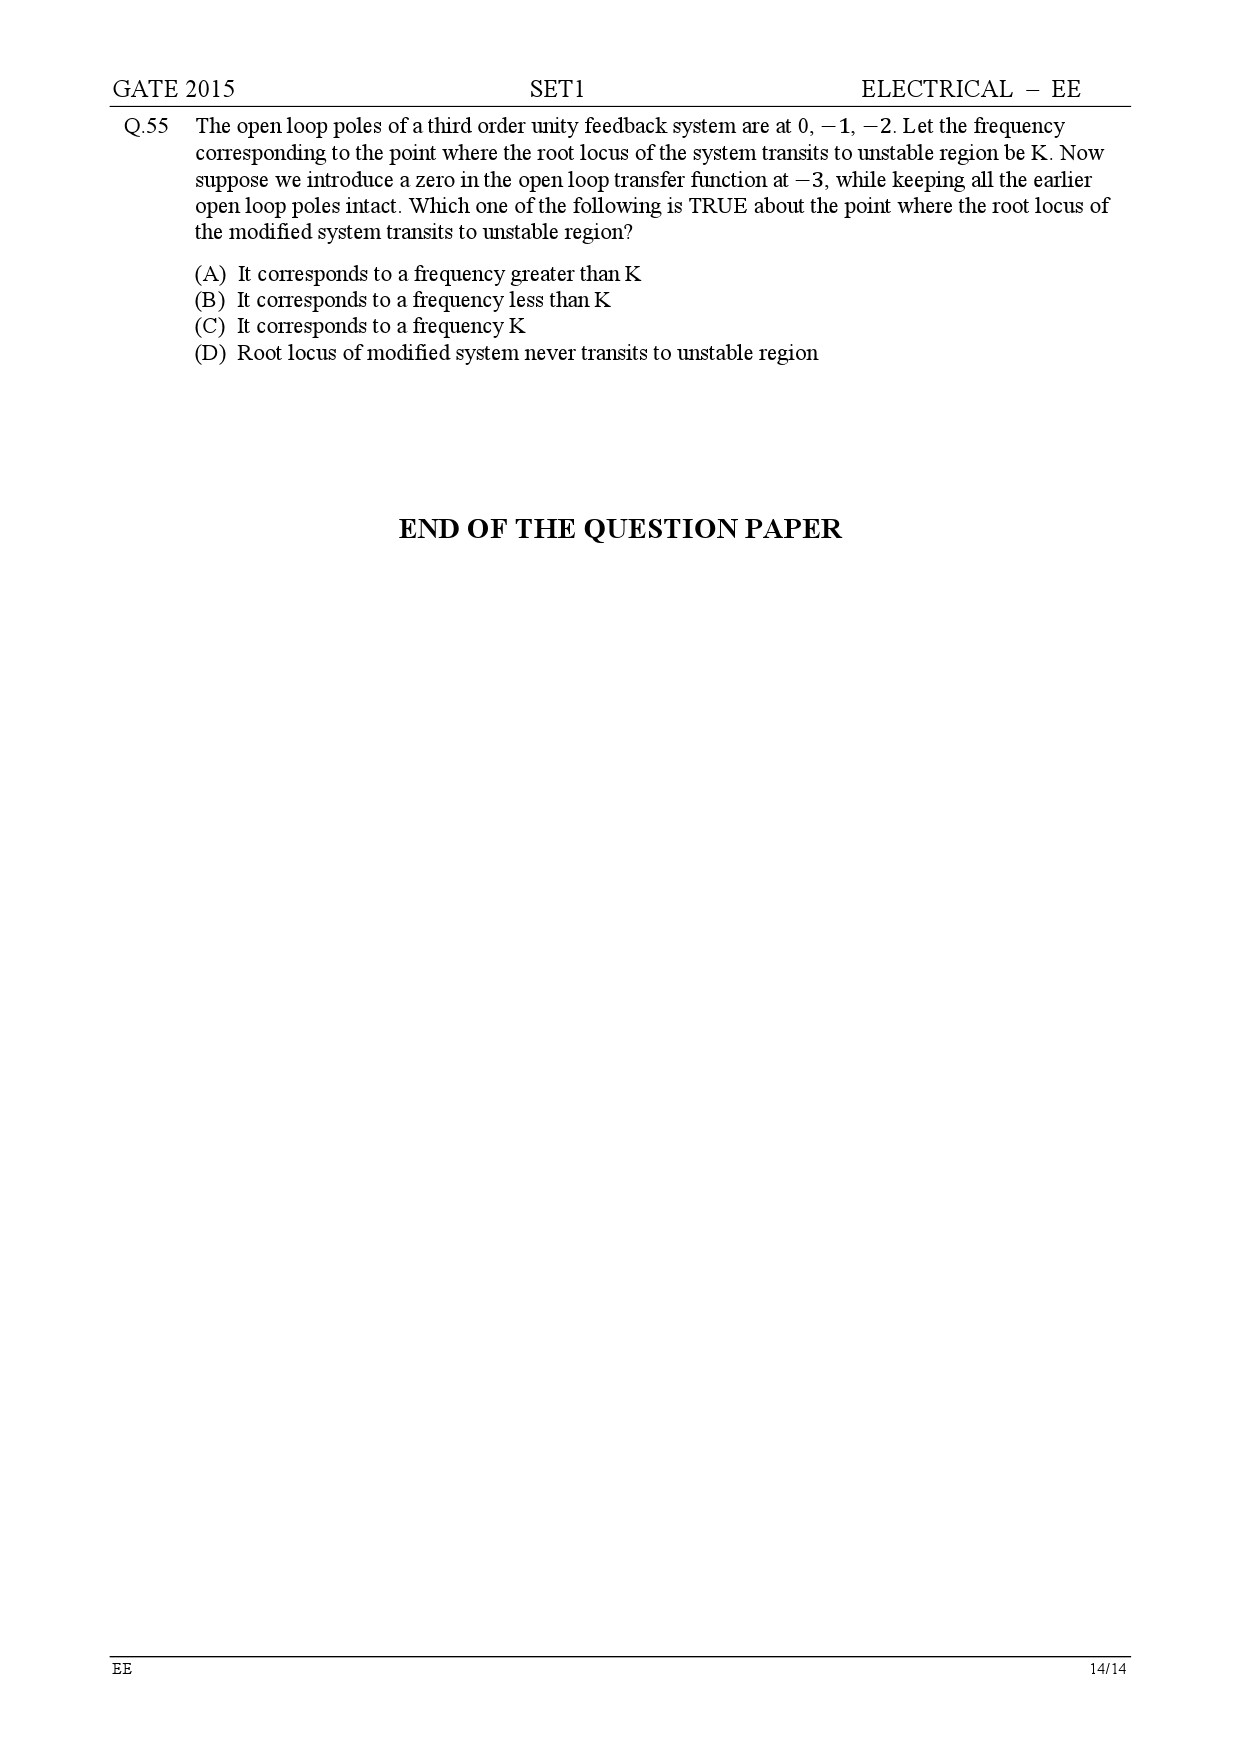 GATE Exam Question Paper 2015 Electrical Engineering Set 1 14